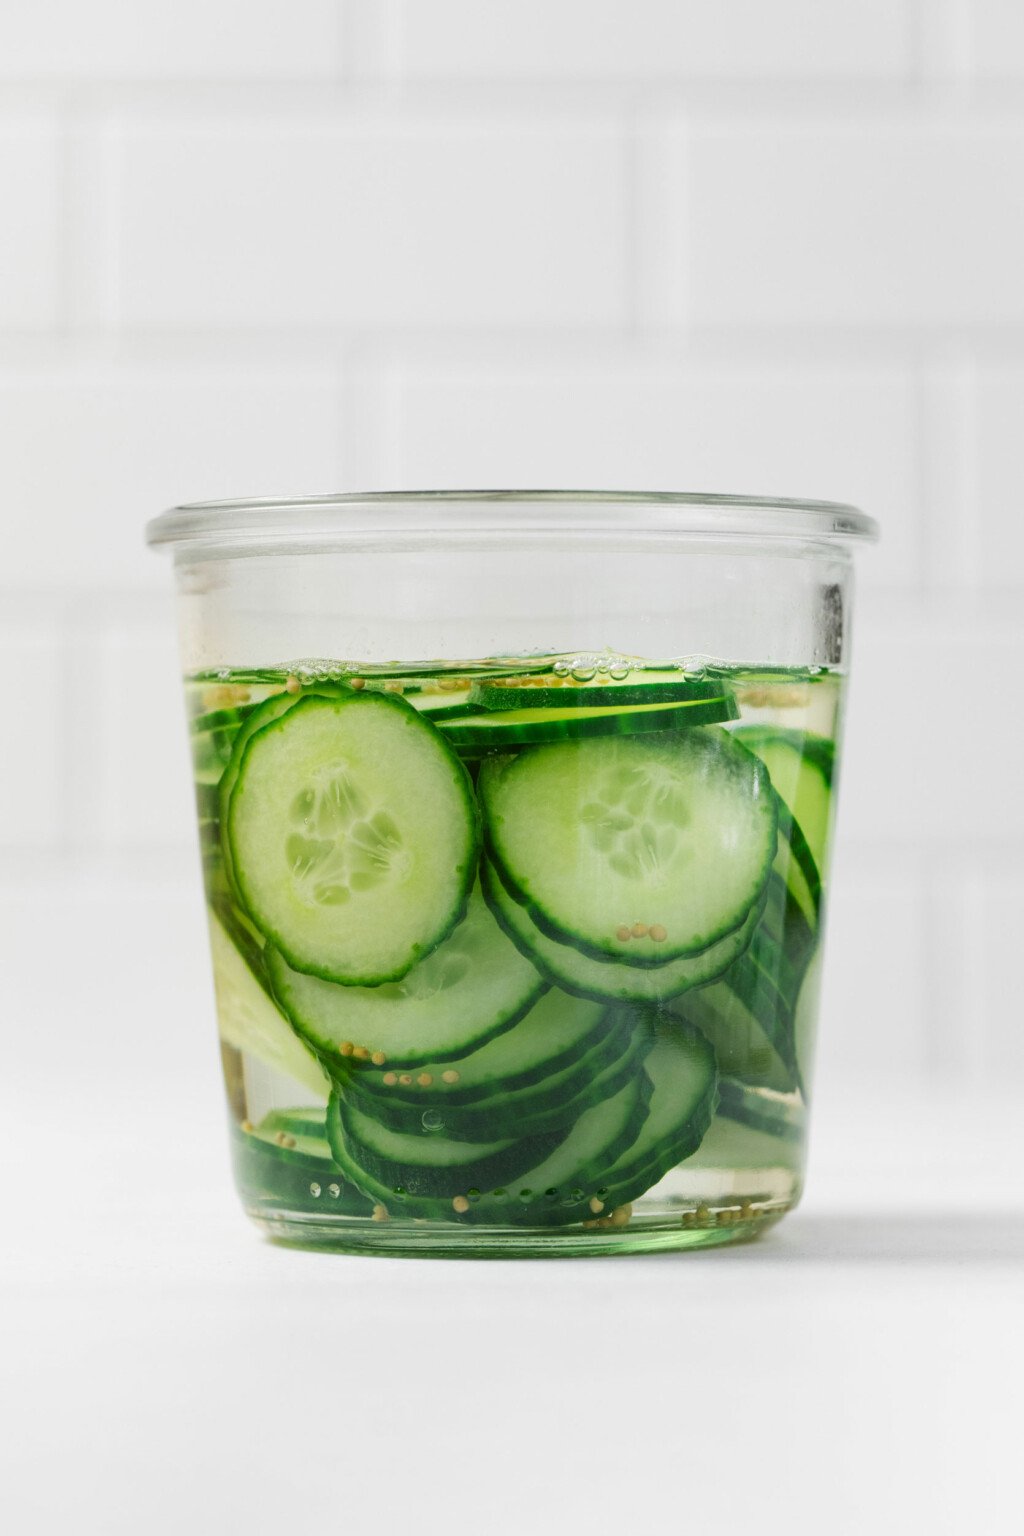 A glass mason jar has been filled with crisp, bright green sliced vegetables and pickling liquid.